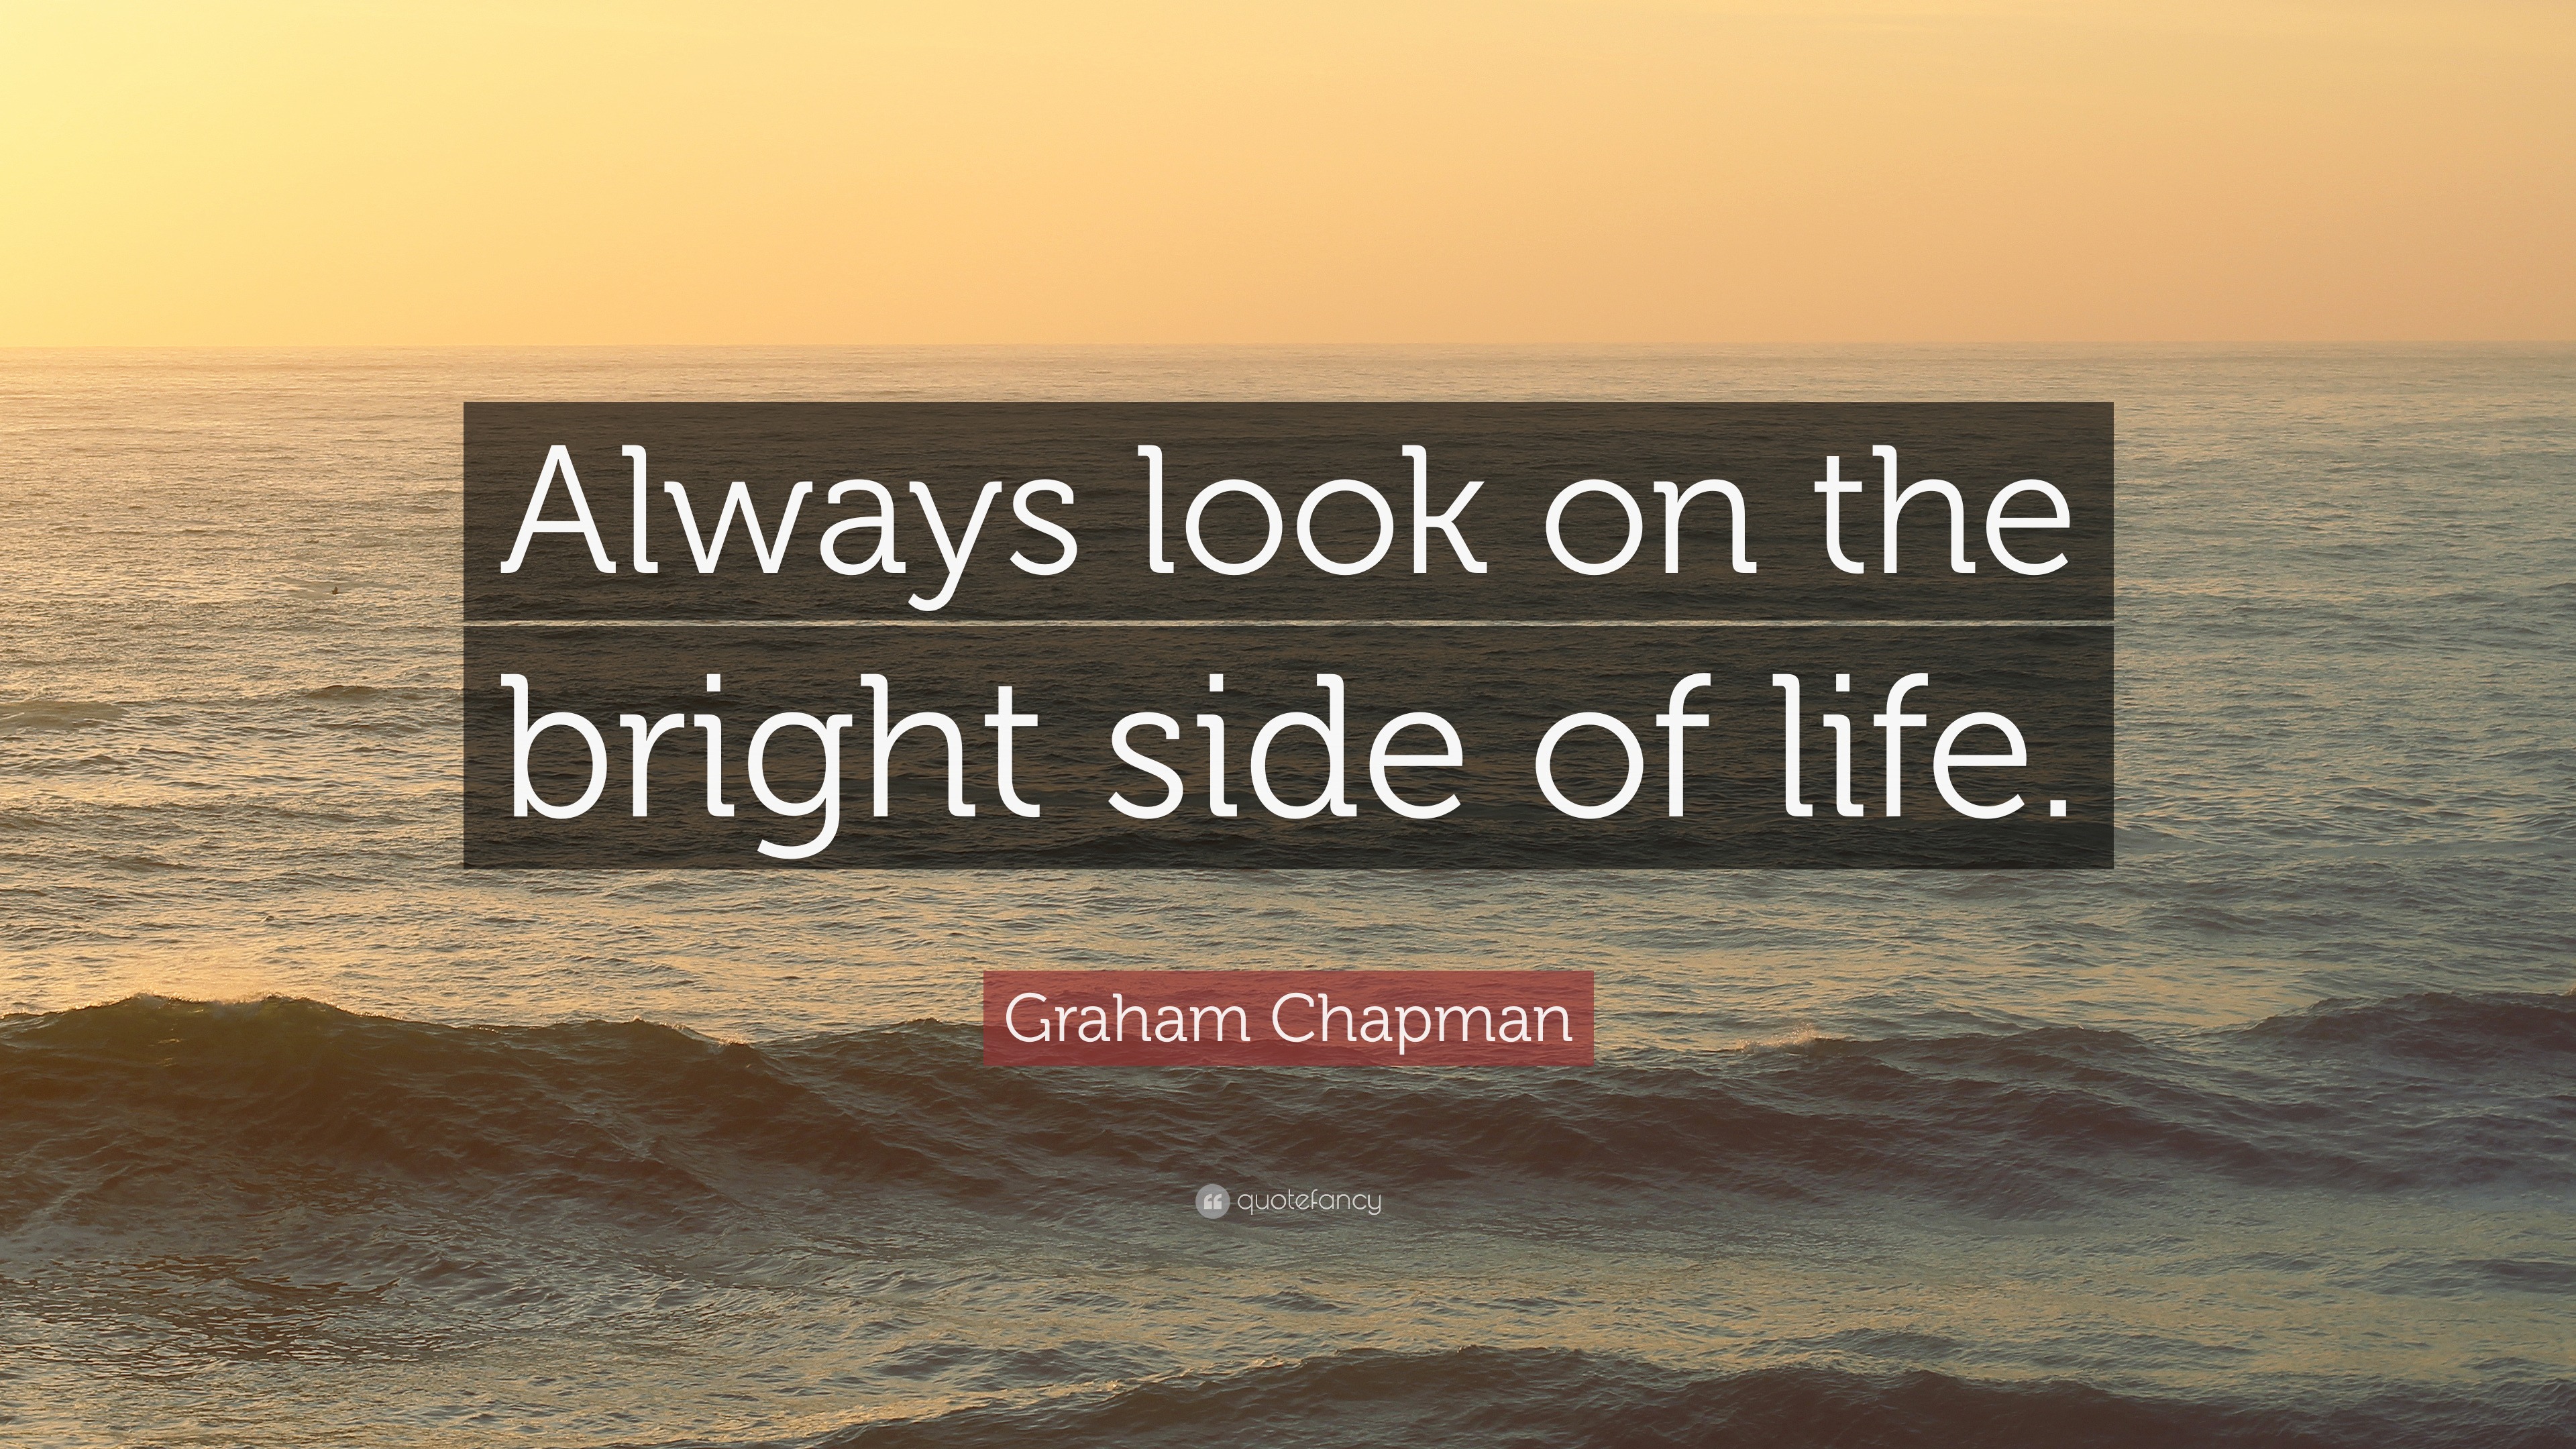 Always Look On The Bright Side Of Life Tekst Graham Chapman Quote: “Always look on the bright side of life.”